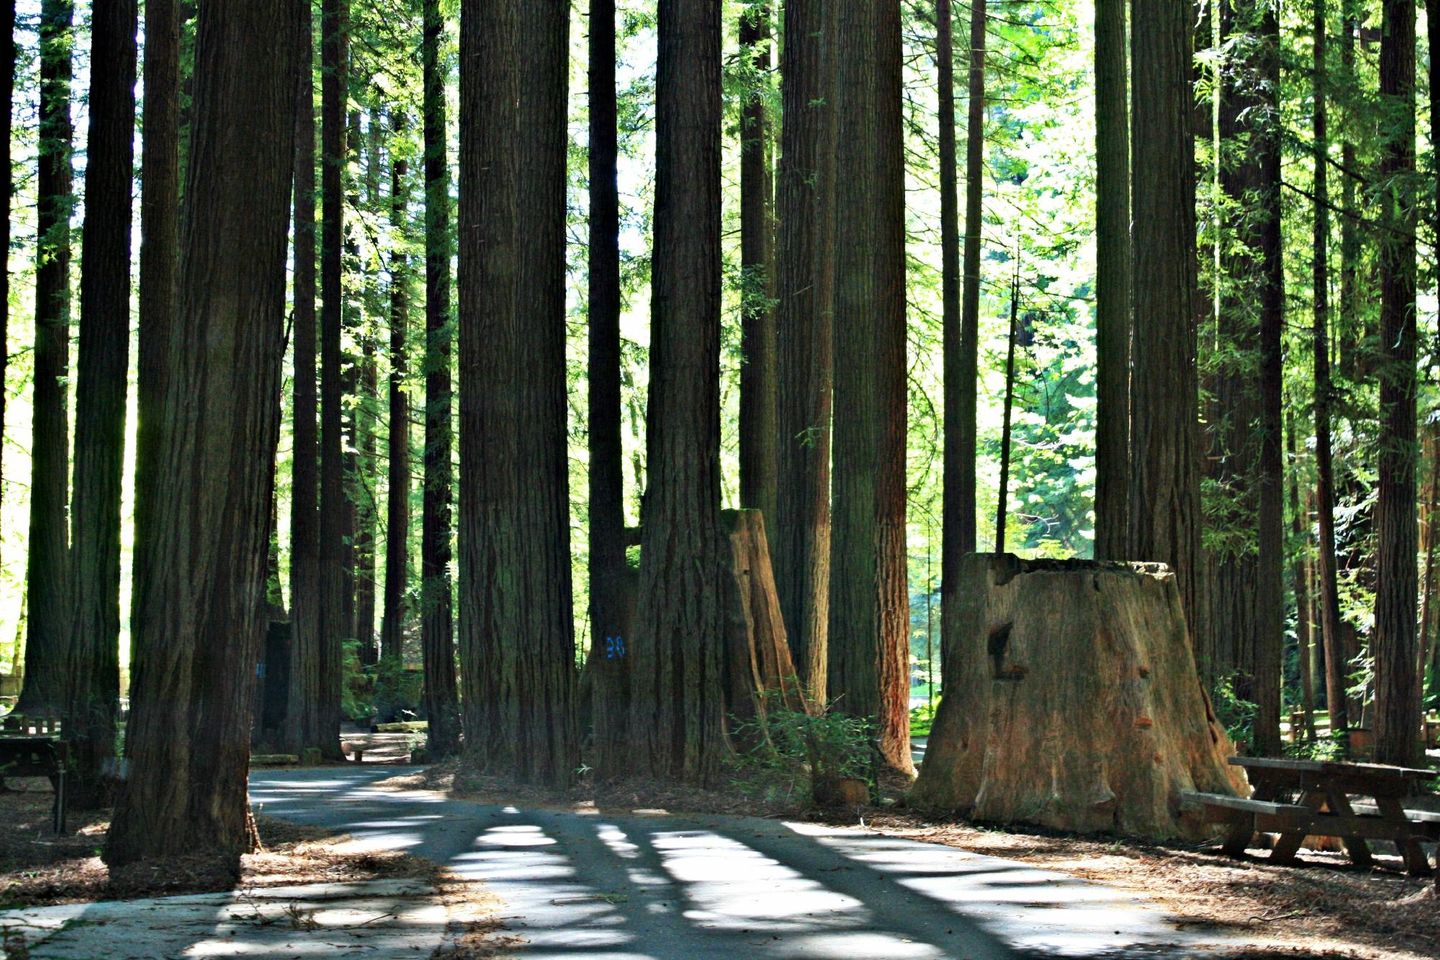 Escape to Natures Wonderland: Avenue of the Giants